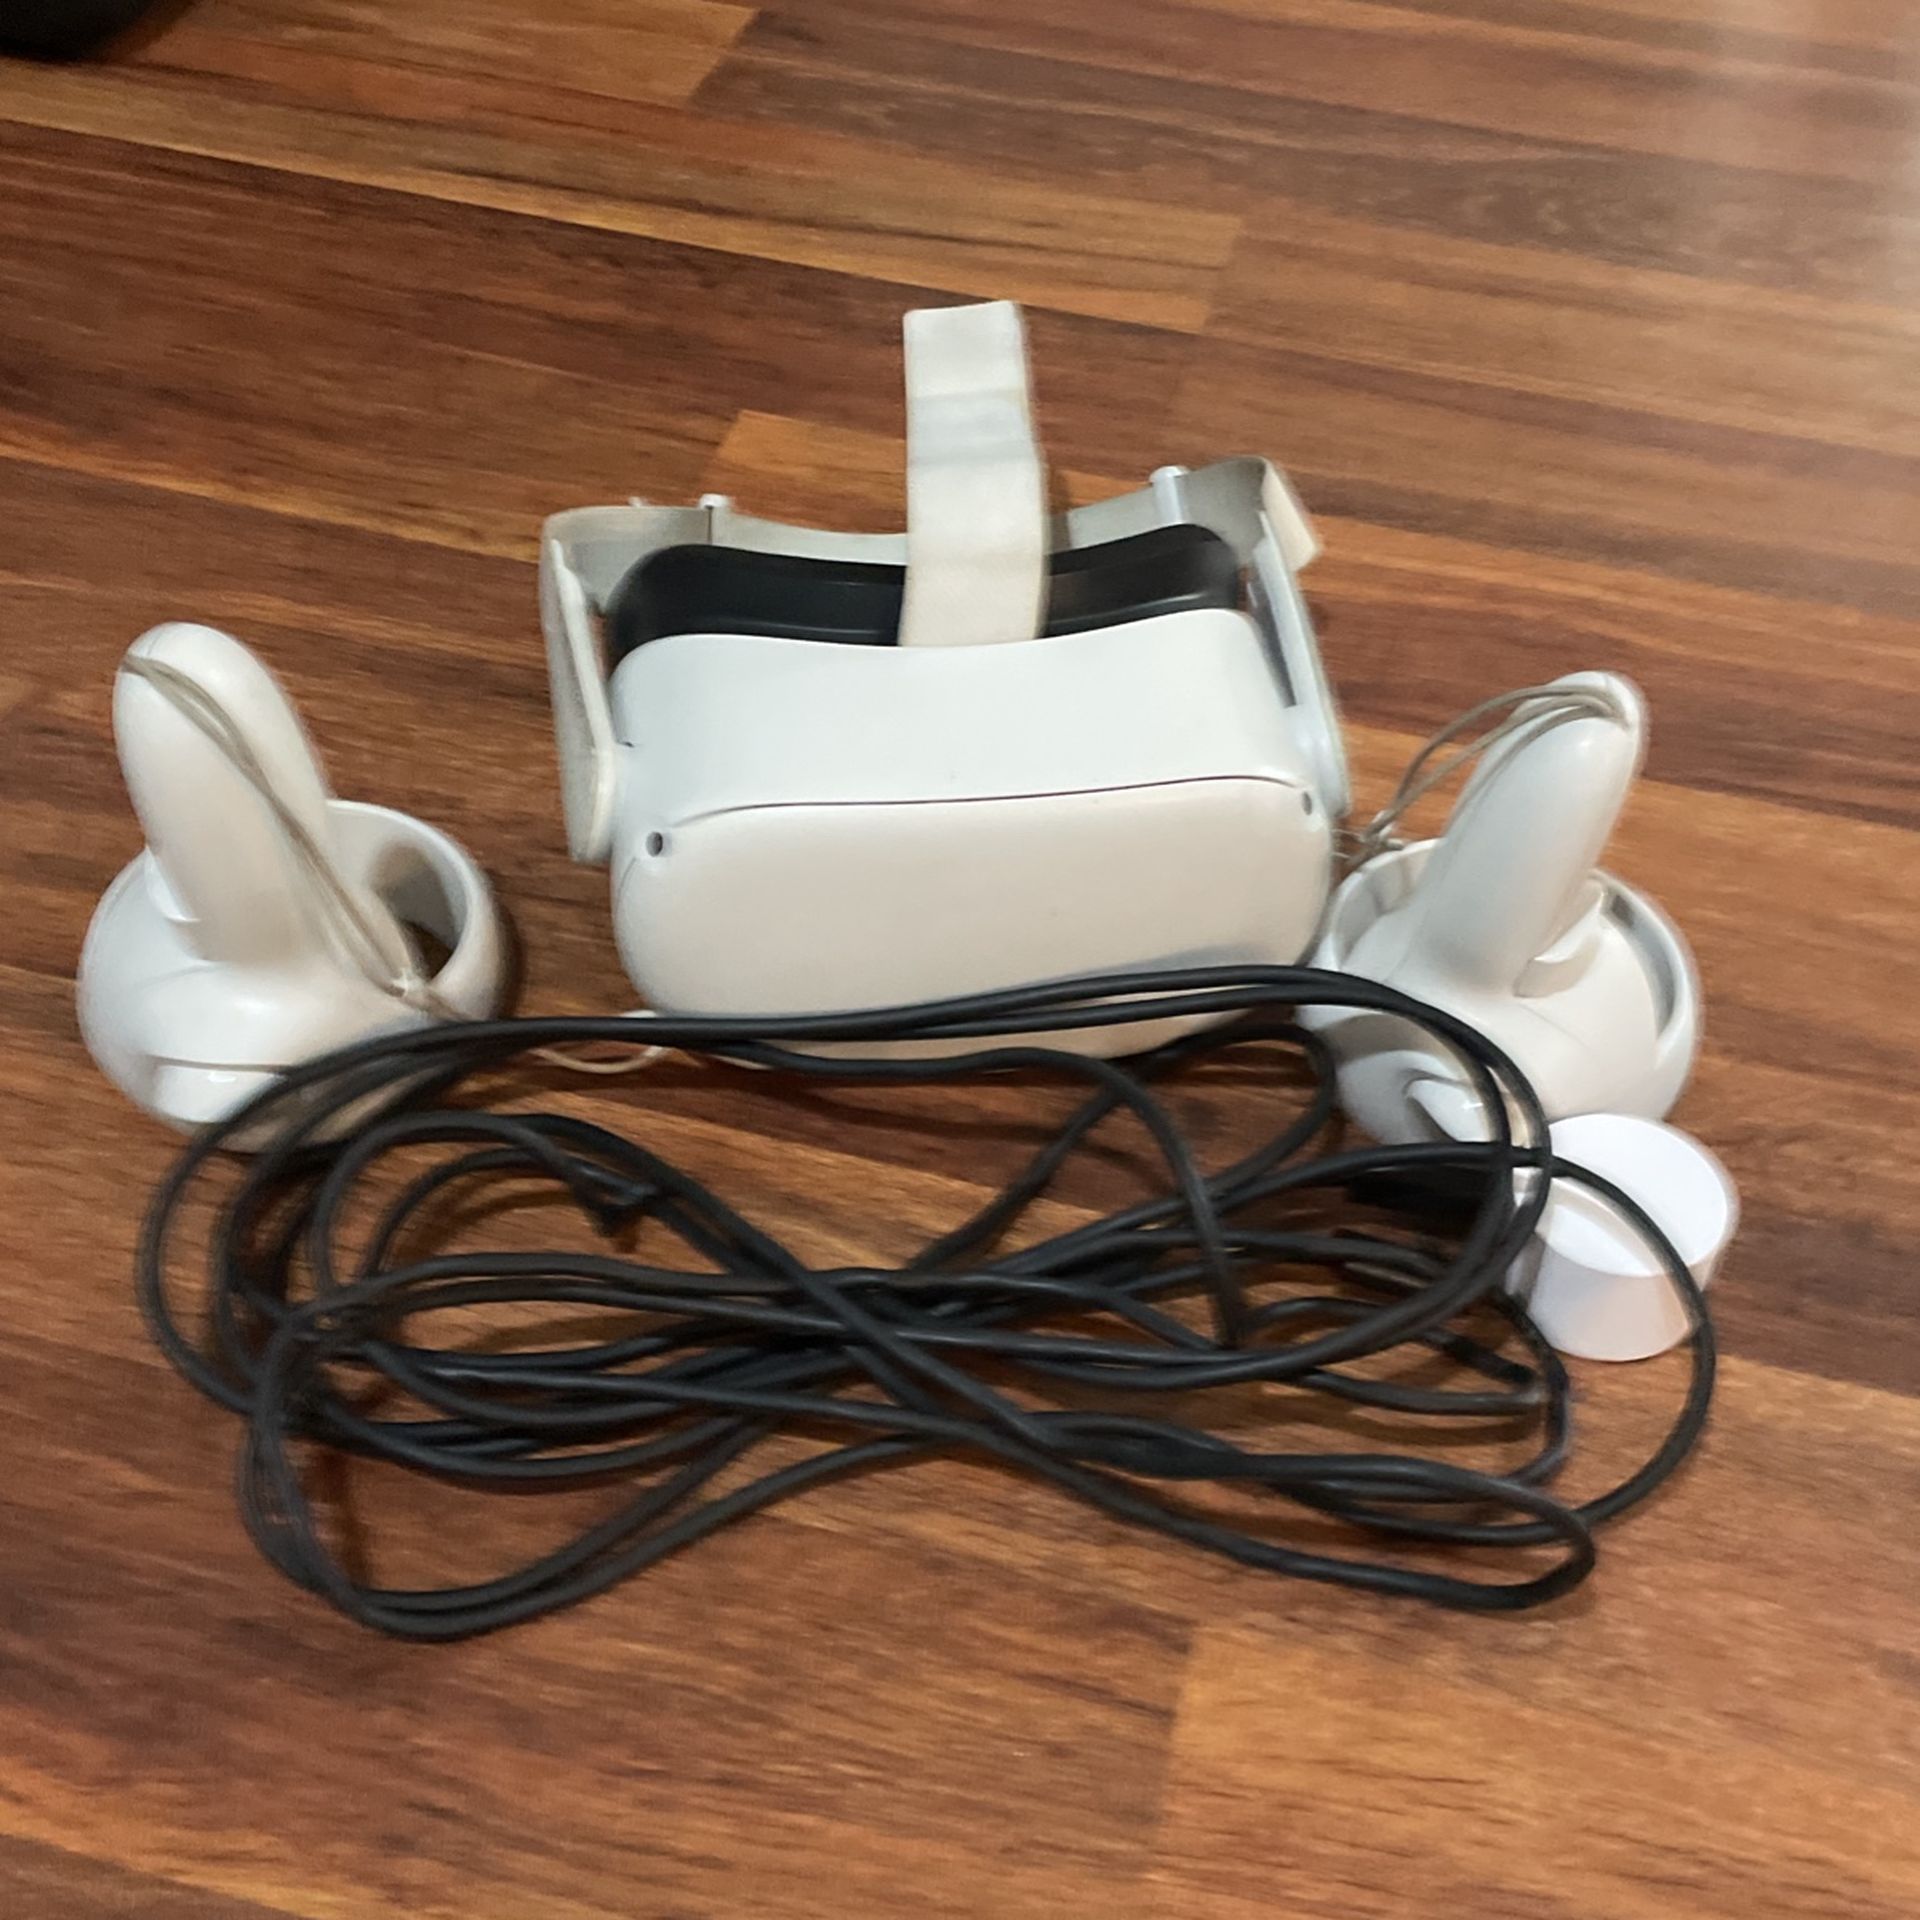 Oculus quest two